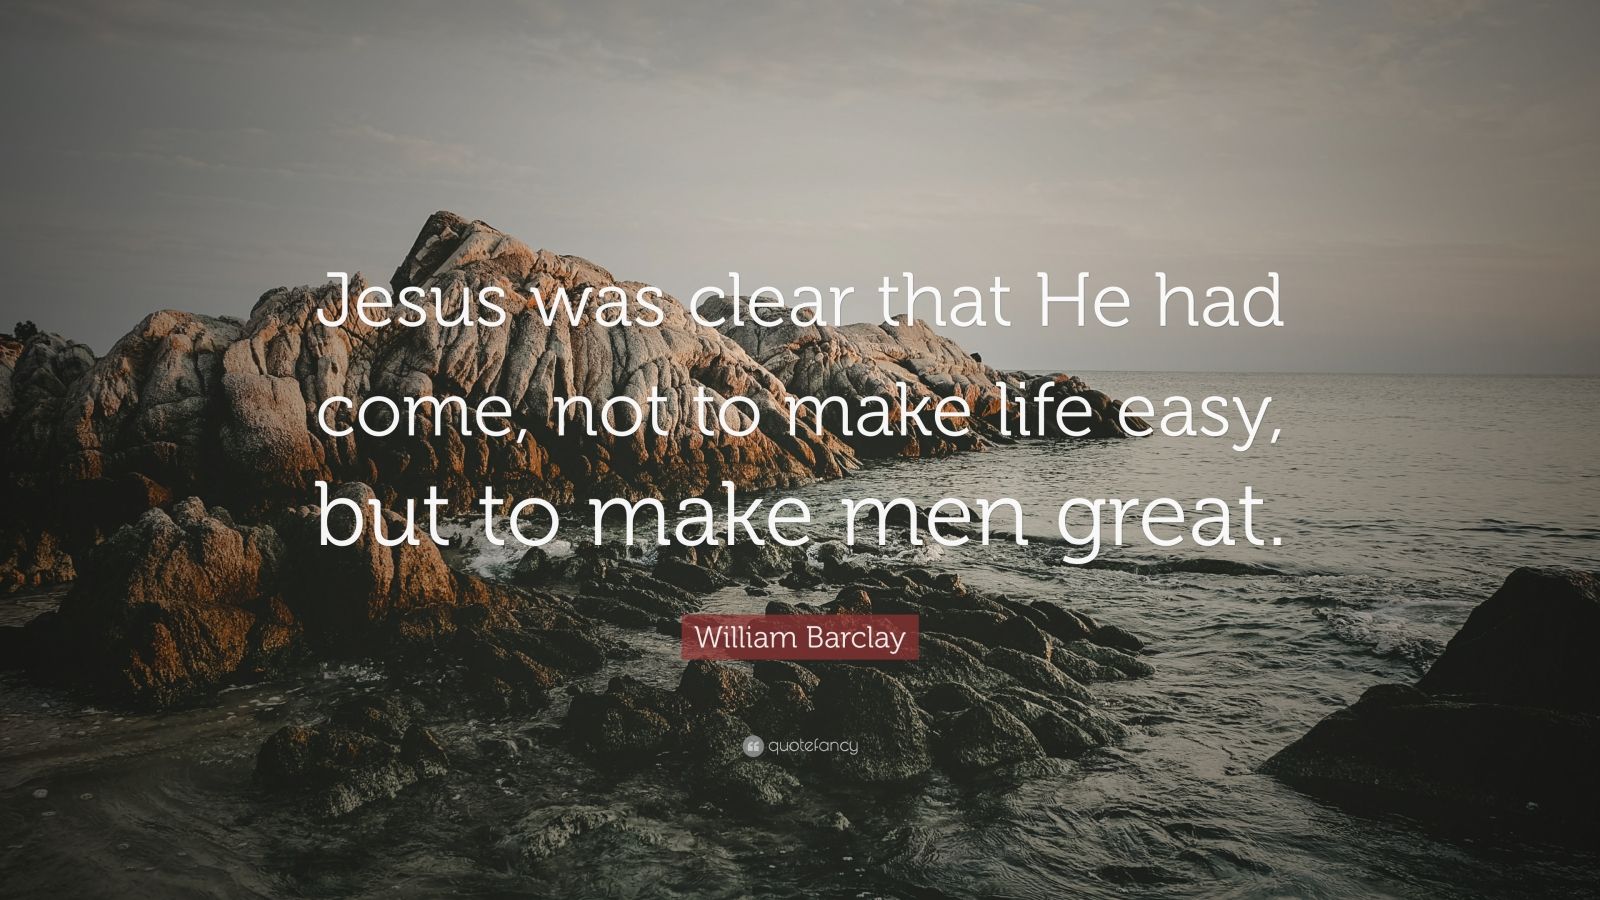 William Barclay Quote: "Jesus was clear that He had come, not to make life easy, but to make men ...